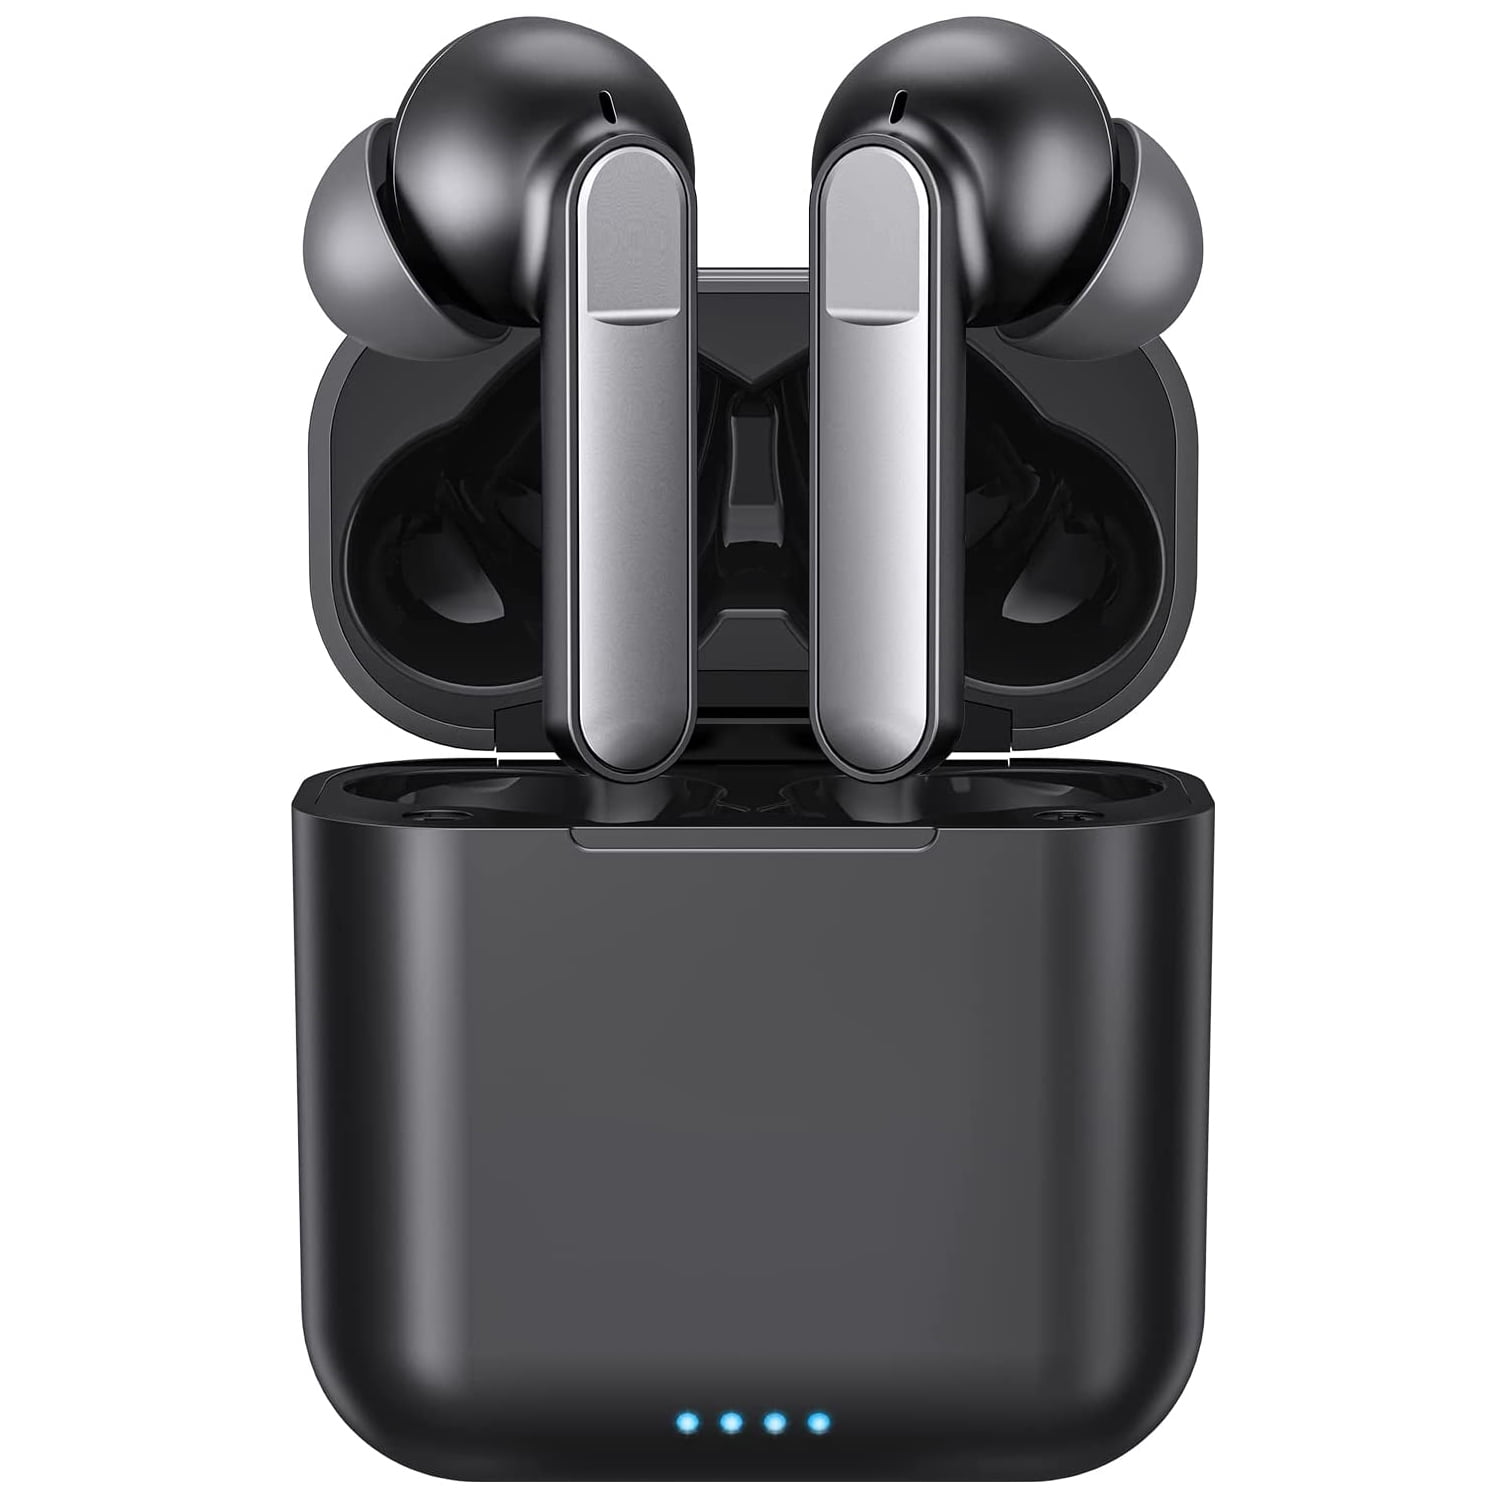 Bluetooth 5.1 Earbuds Noise Cancelling Wireless Headphones Wireless Earbuds Deep Bass with Type C Charging Case IPX7 Waterproof Built-in Mic Headset for iPhone Android 